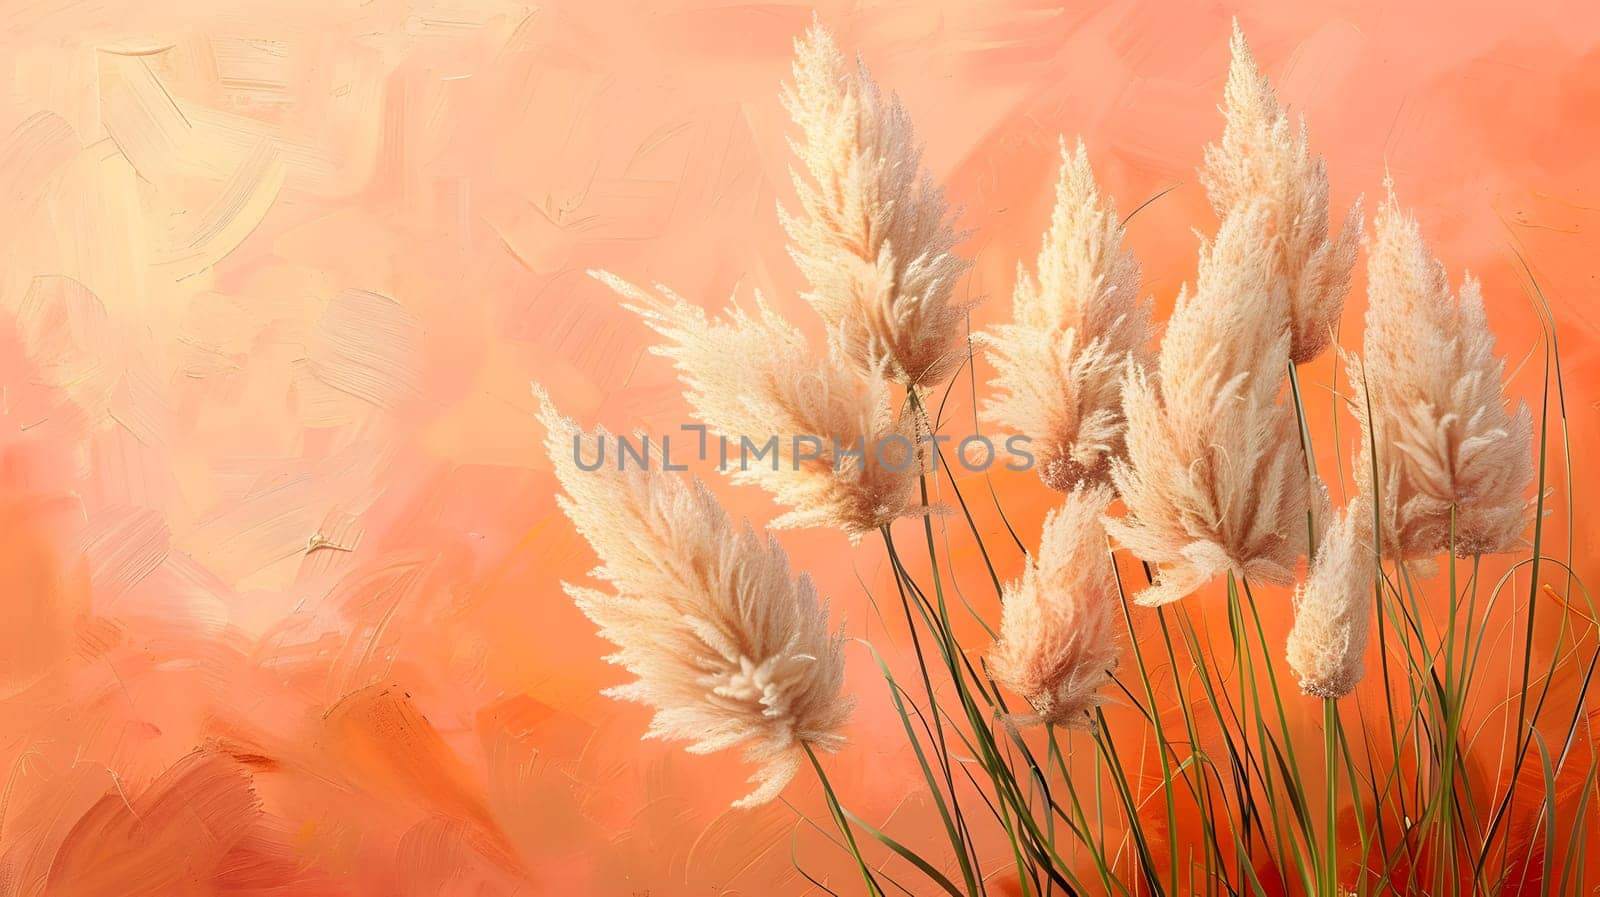 A field of tall grass swaying in the wind against a stunning peachcolored sky. The natural landscape creates a beautiful art piece with the grass as the main focus